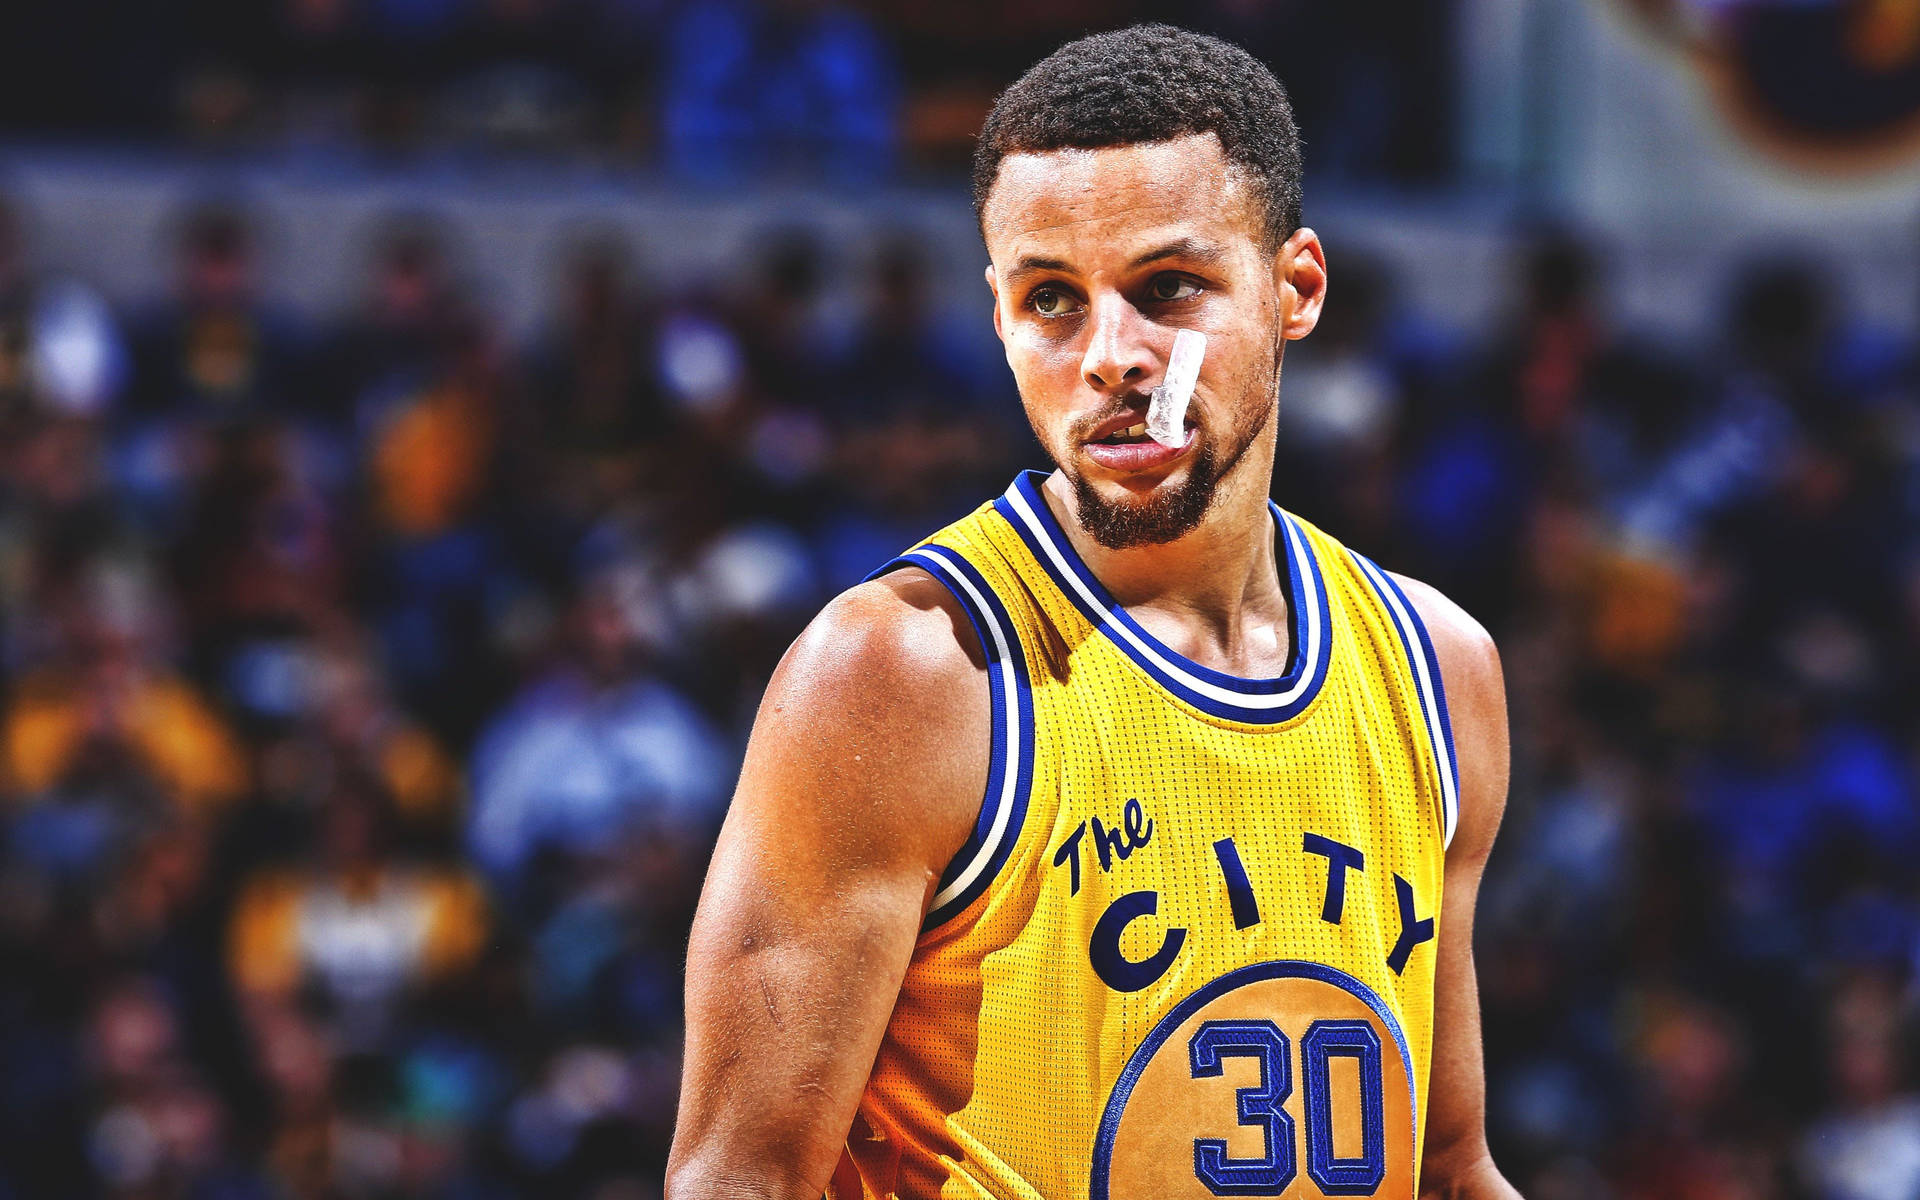 4k Nba Steph Curry In Yellow Jersey